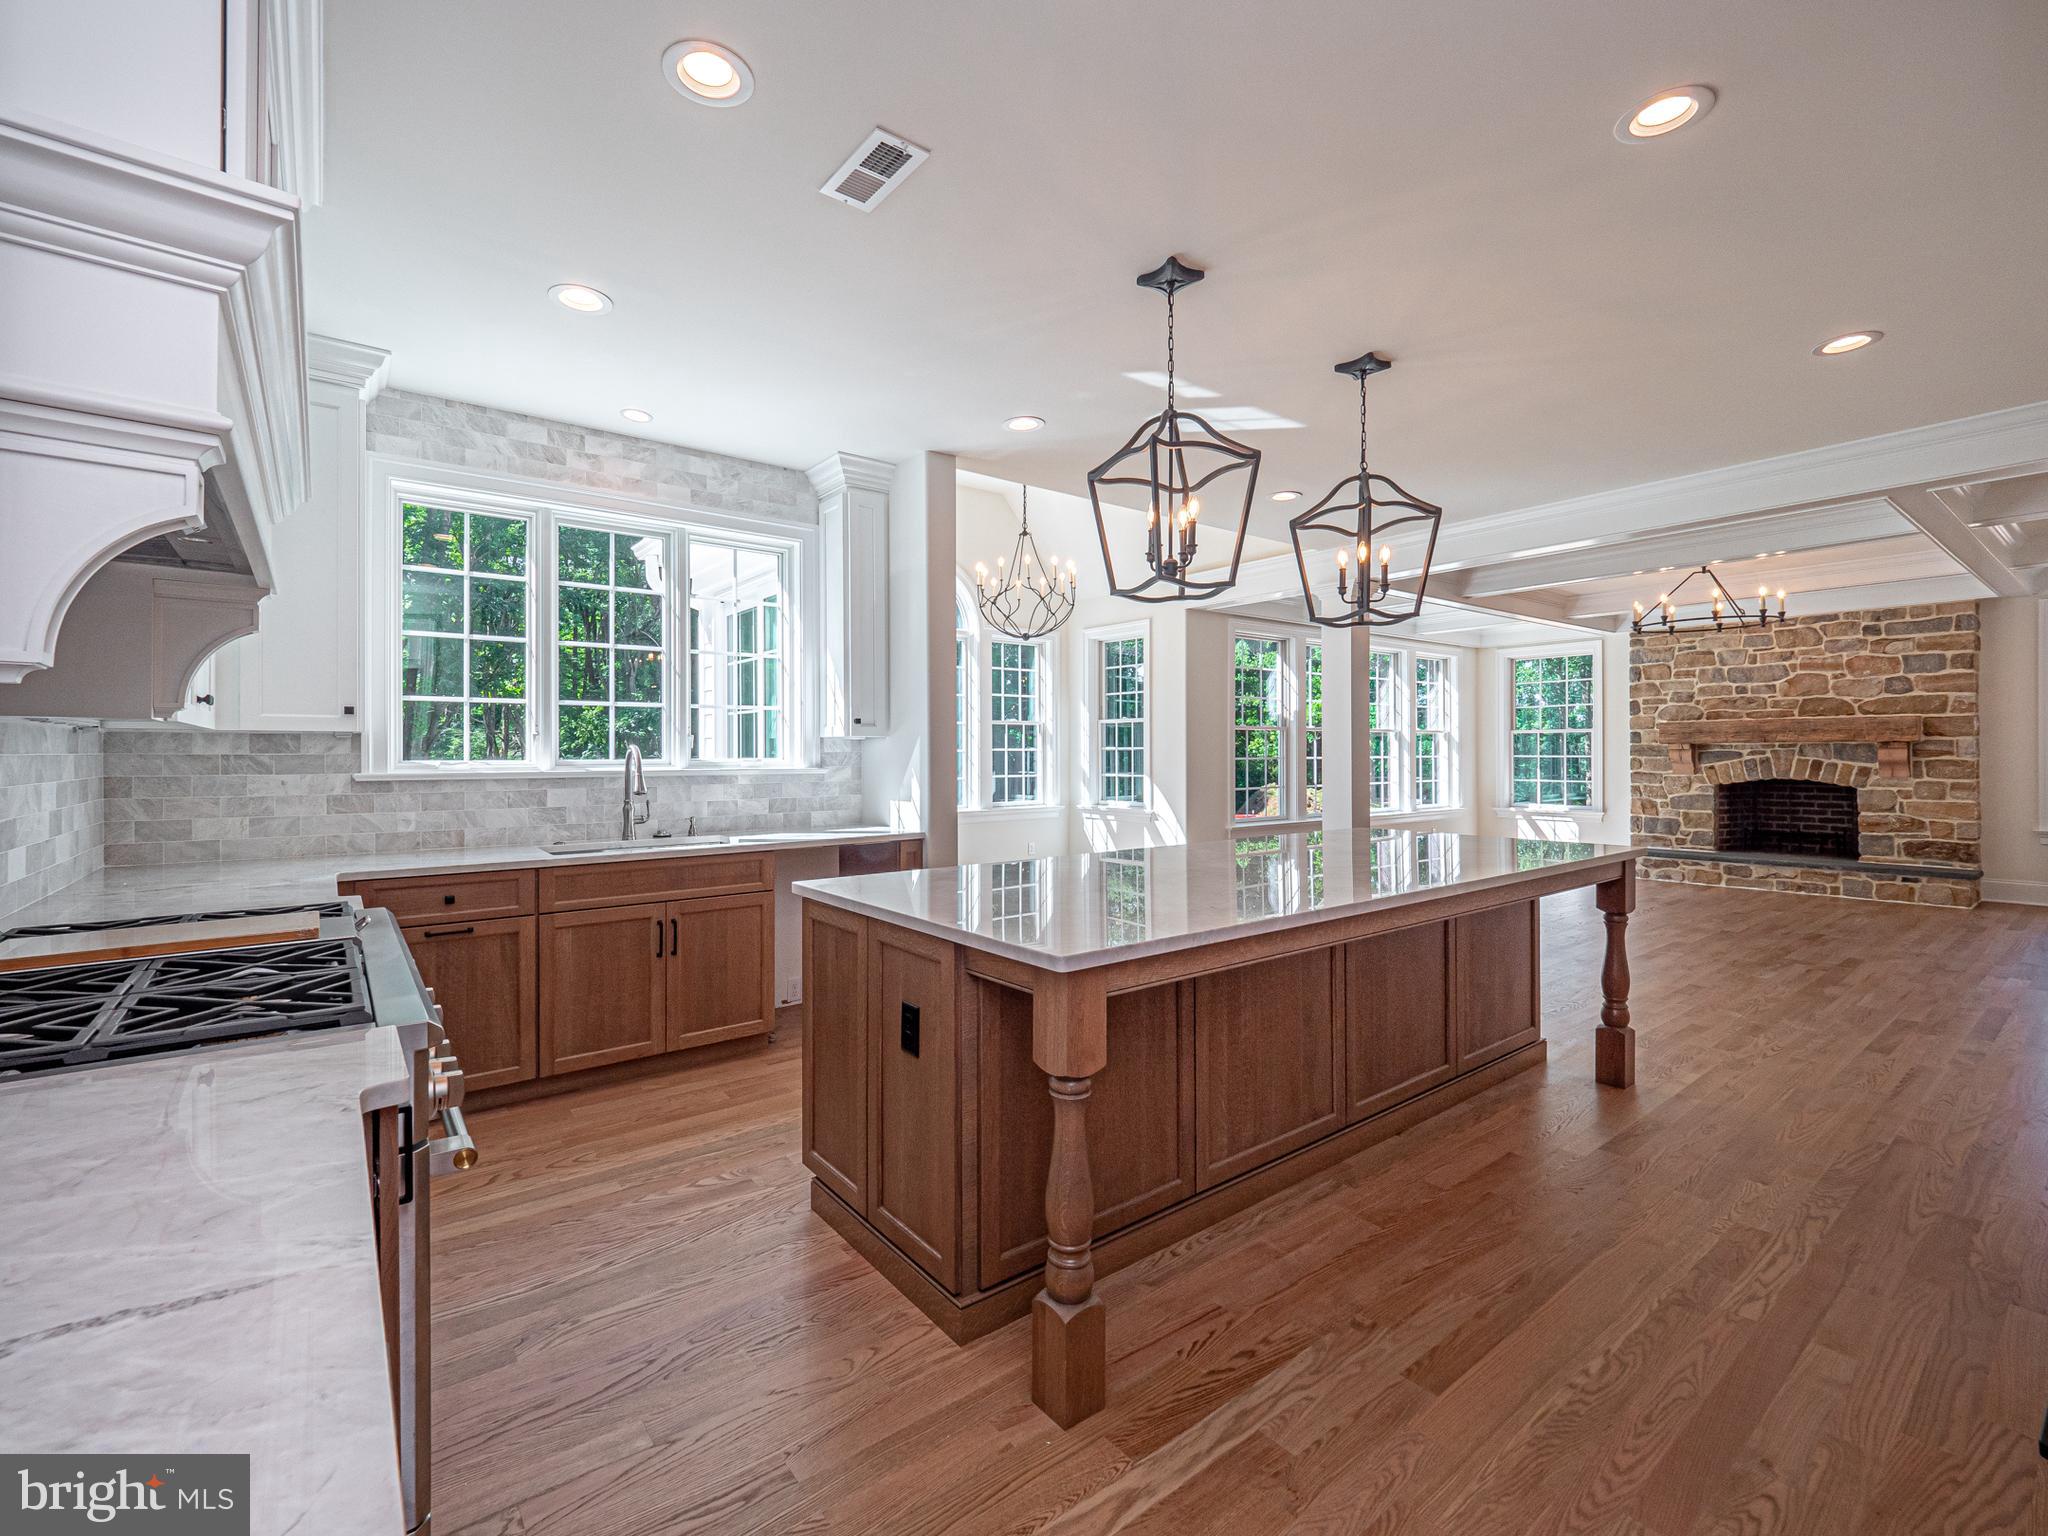 a kitchen with granite countertop a stove and a wooden floors